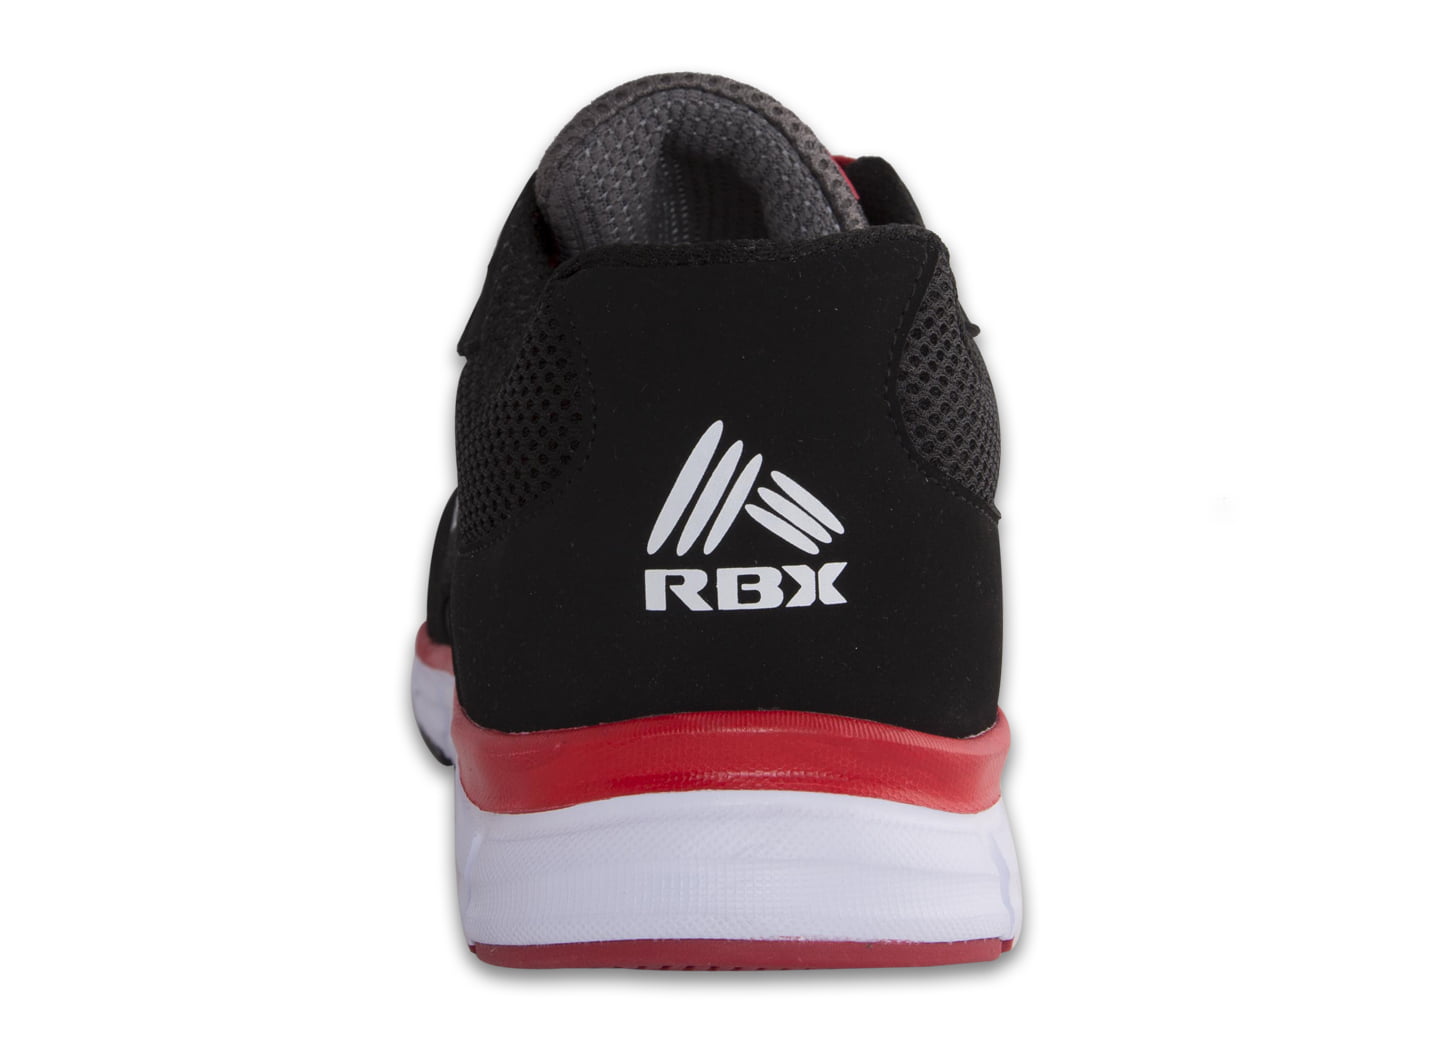 rbx live life active shoes price